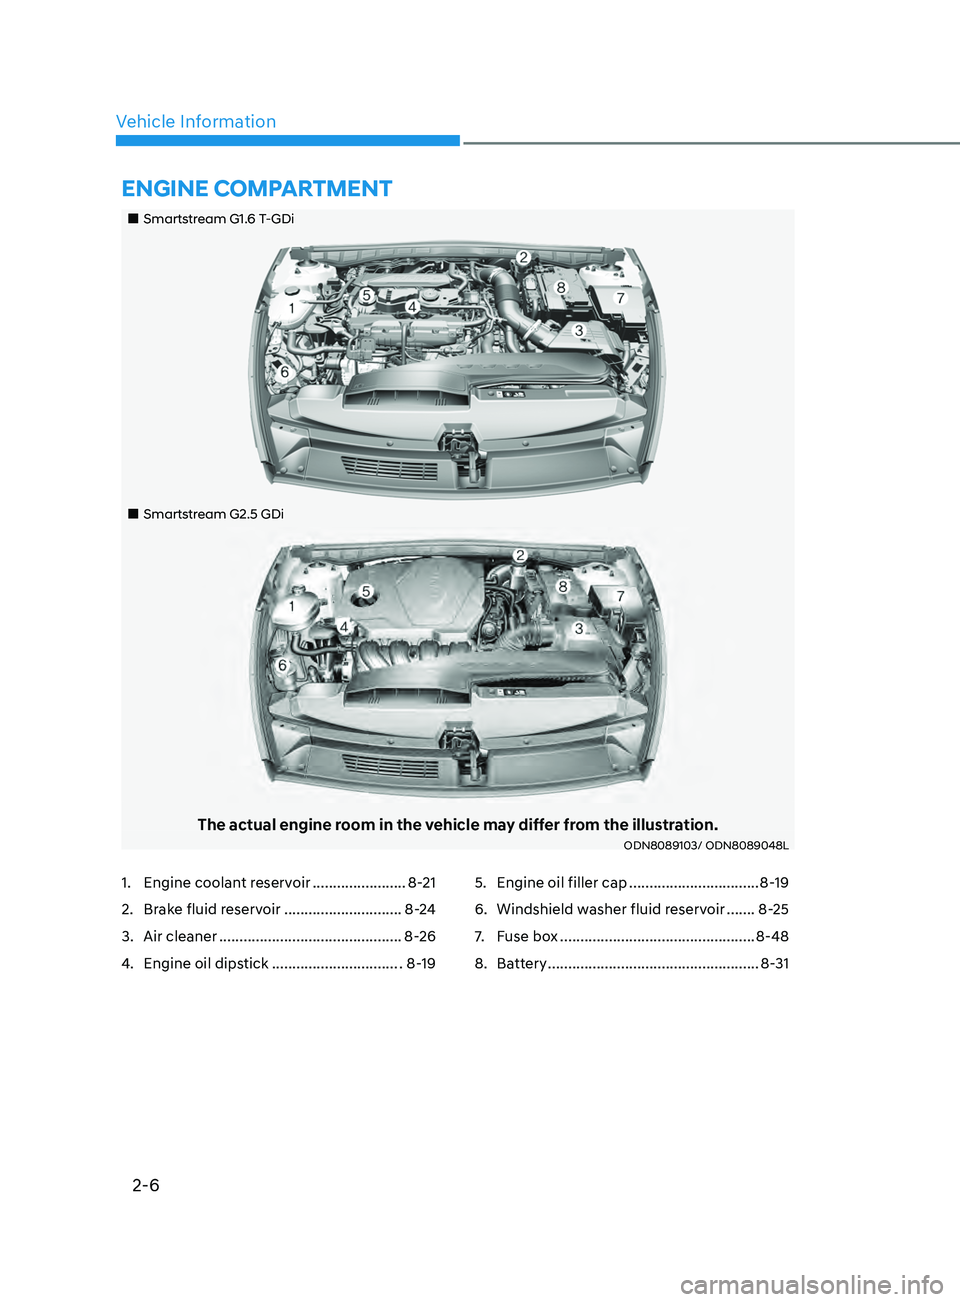 HYUNDAI SONATA 2021  Owners Manual 2-6
Vehicle Information
„„Smartstream G1.6 T-GDi
„„Smartstream G2.5 GDi
The actual engine room in the vehicle may differ from the illustration.ODN8089103/ ODN8089048L
EnginE ComPar